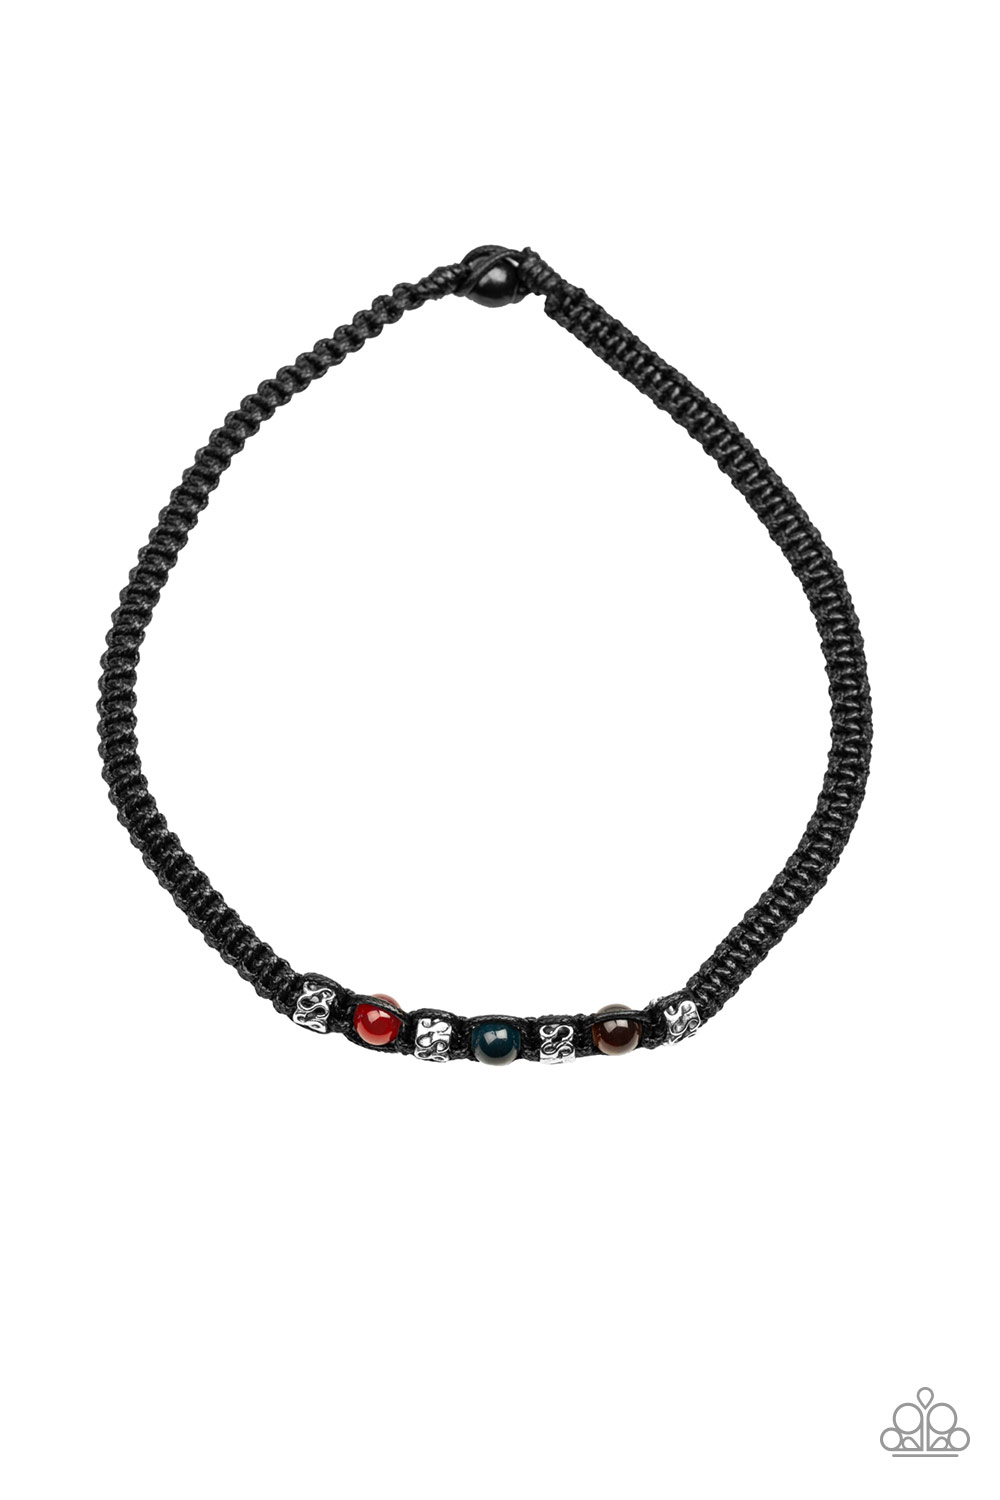 Necklace - The Great ALP - Black